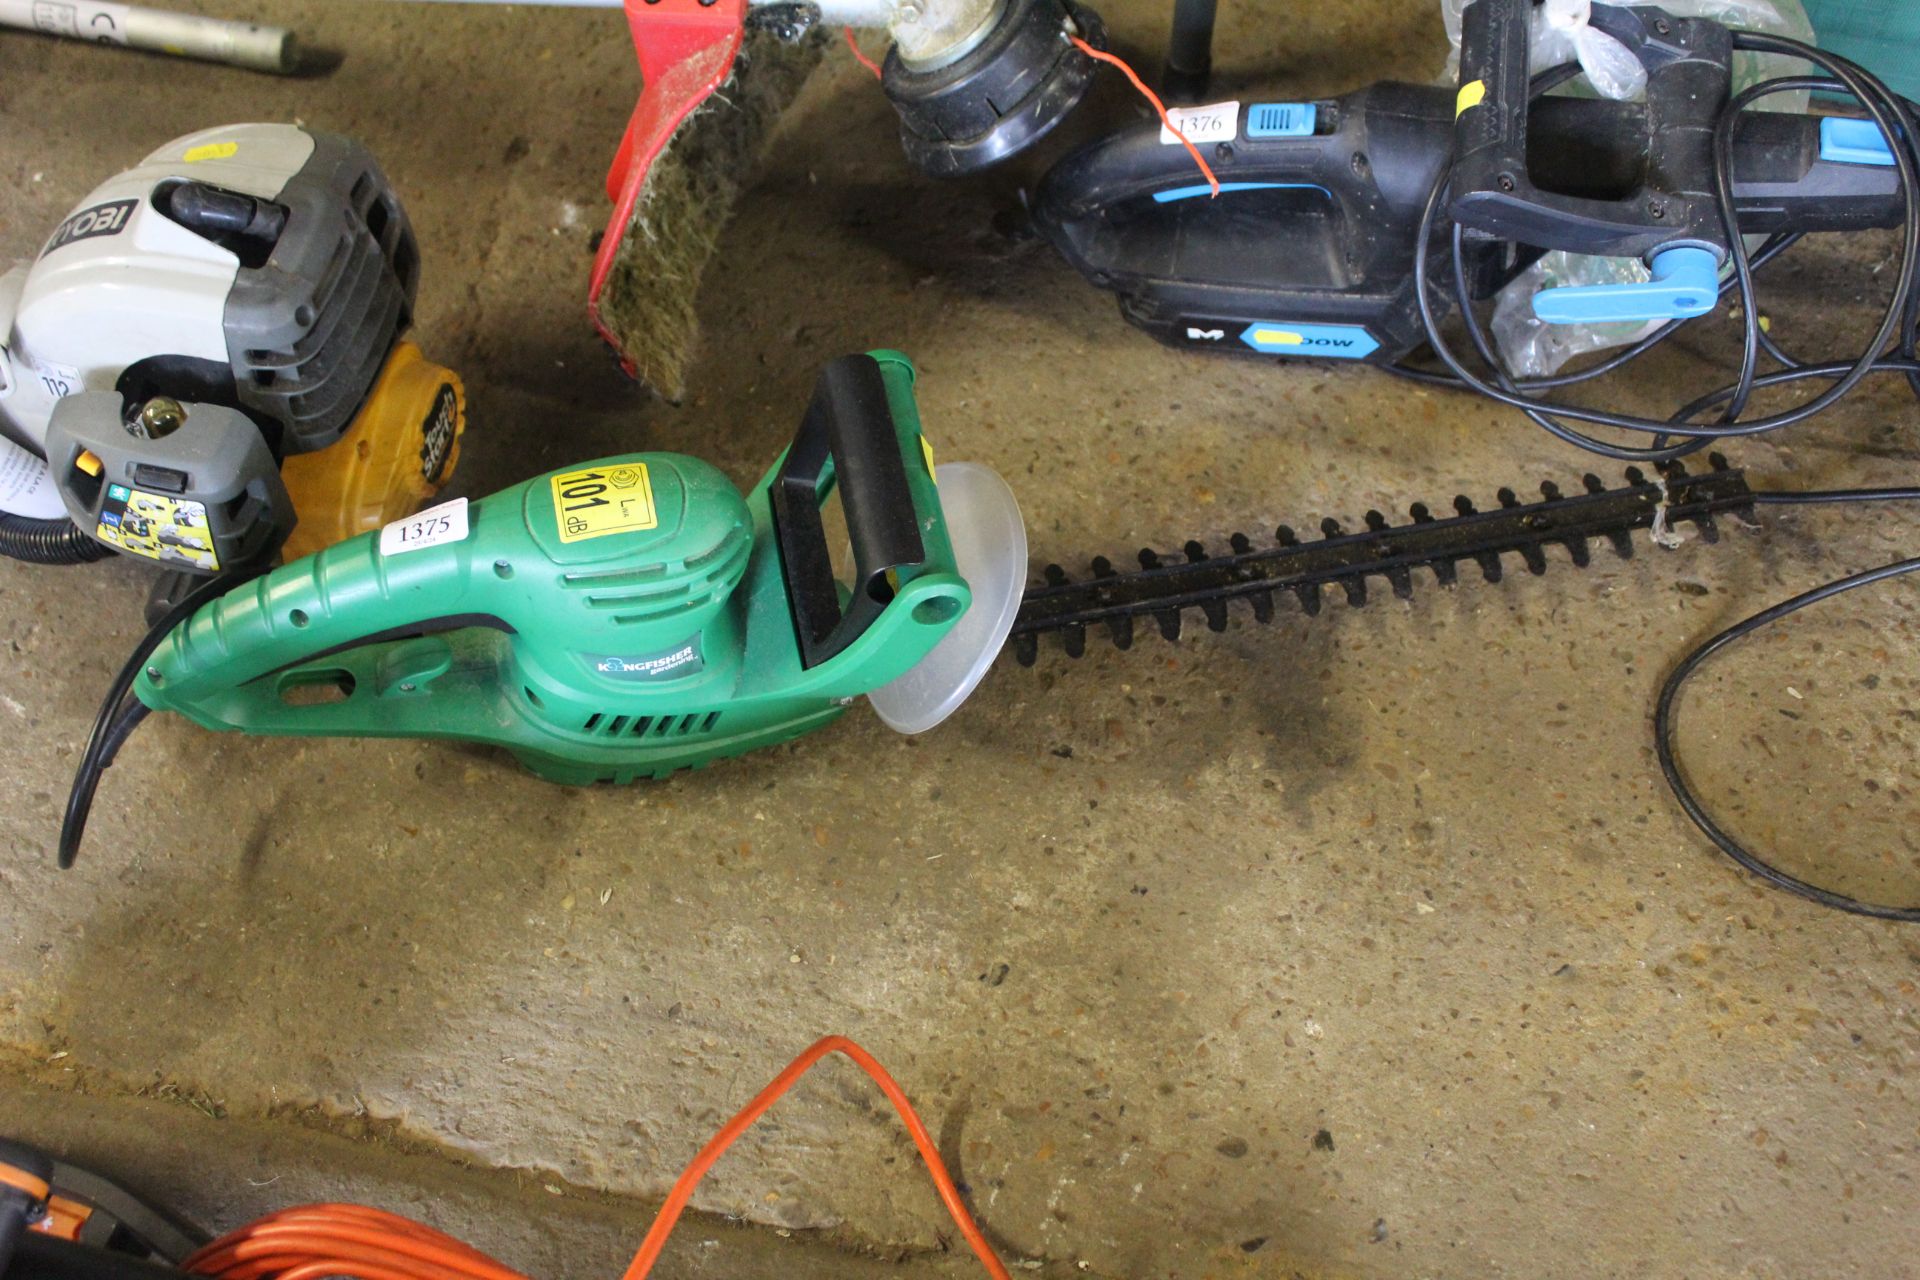 A Kingfisher electric hedge trimmer